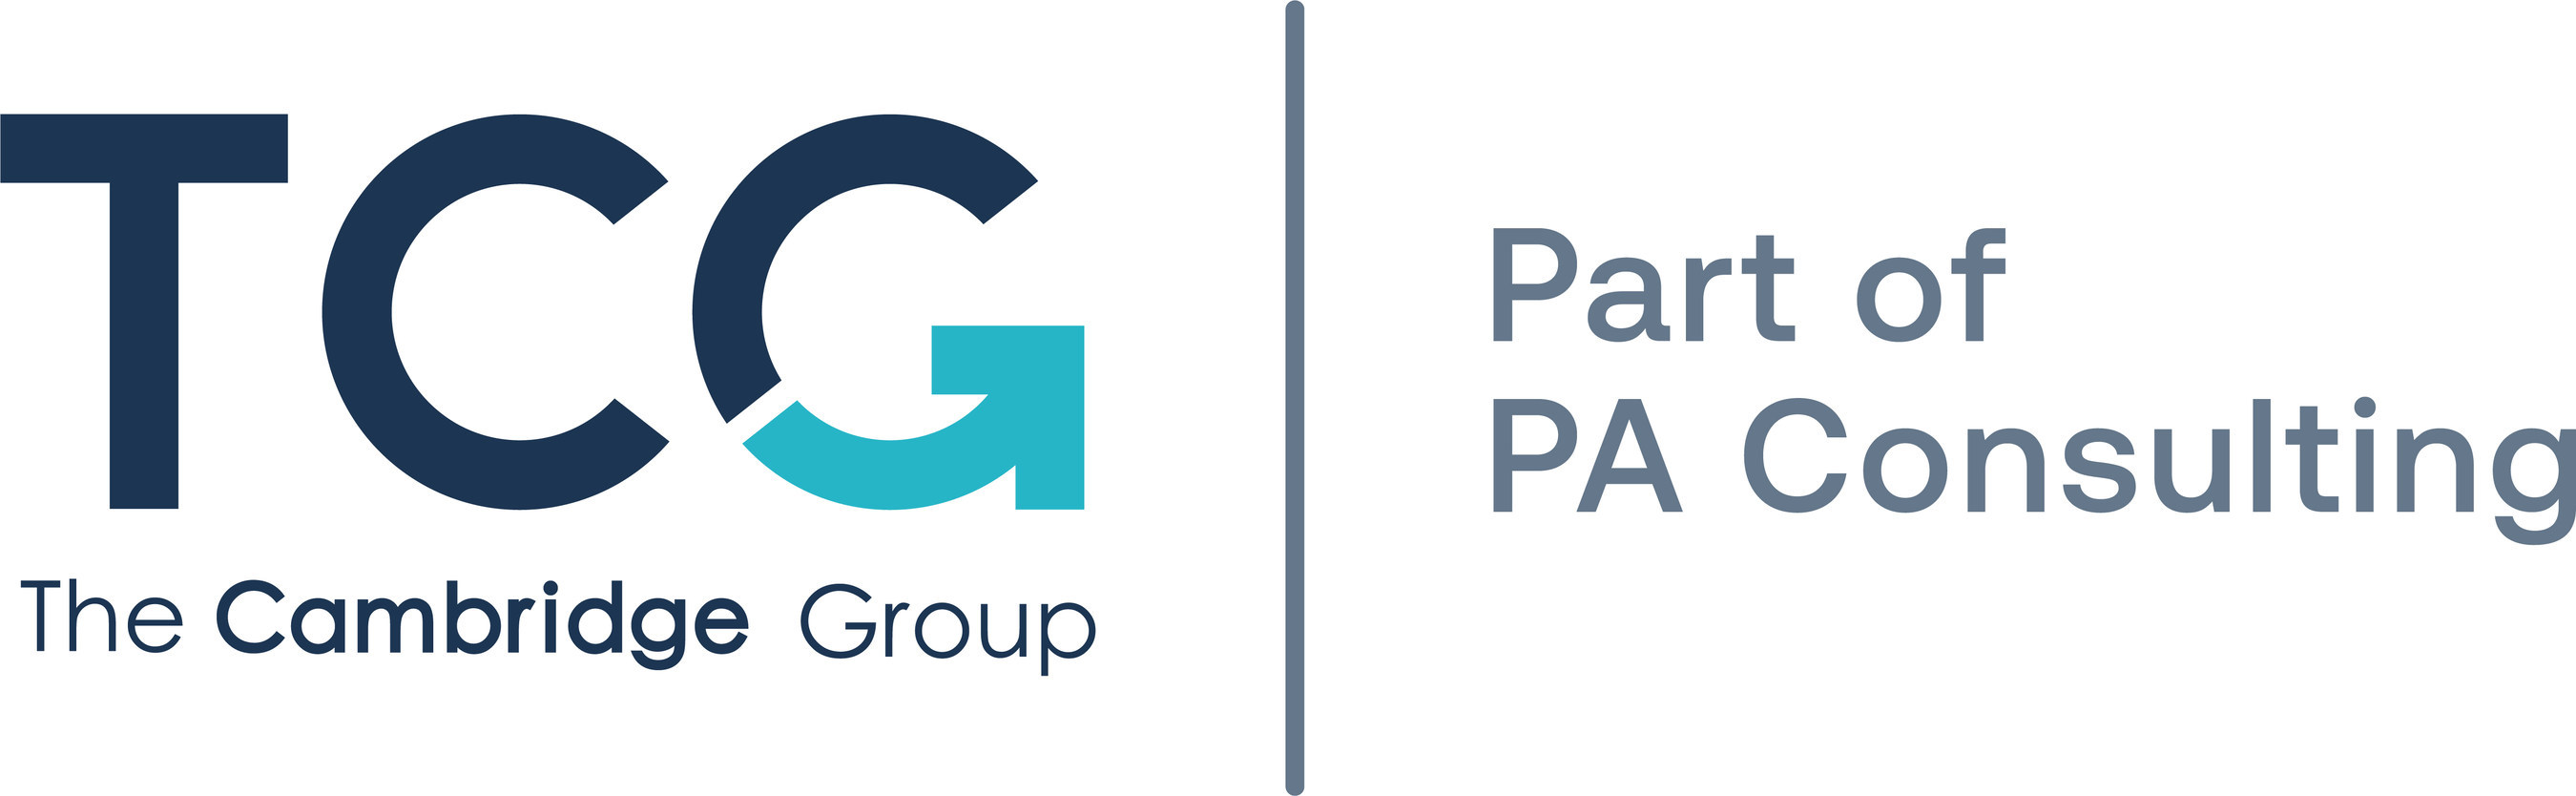 PA Consulting welcomes boutique strategy consulting firm The Cambridge Group